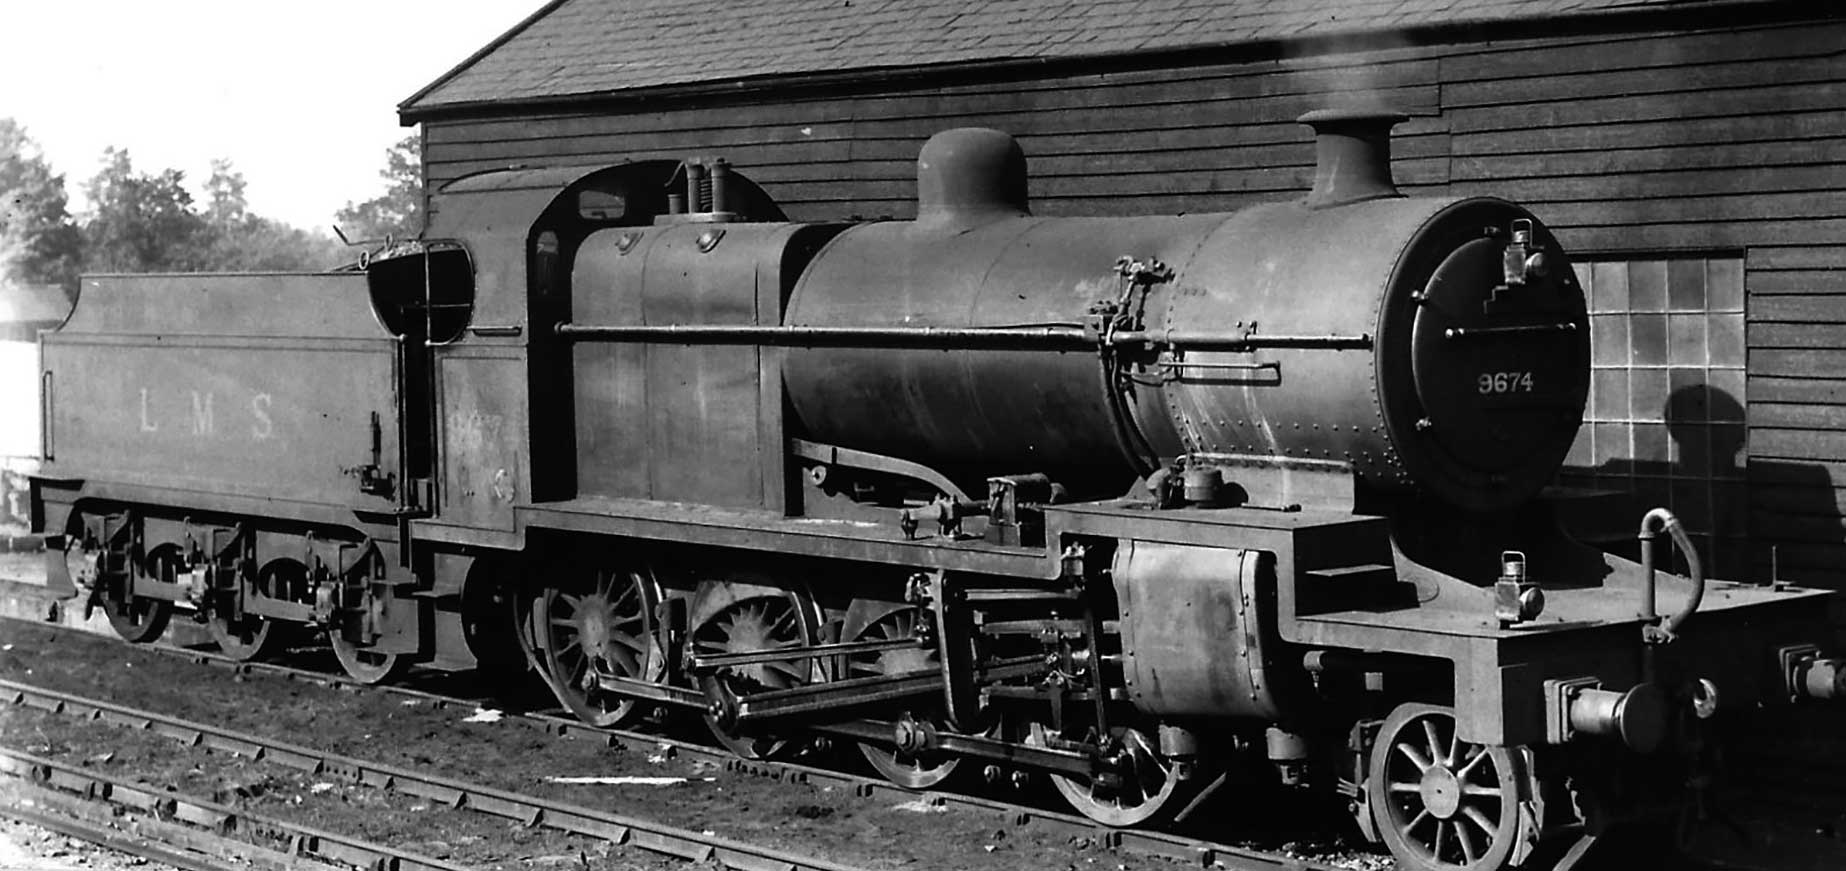 Photo showing LMS No. 9674 at Templecombe on 5 July 1930